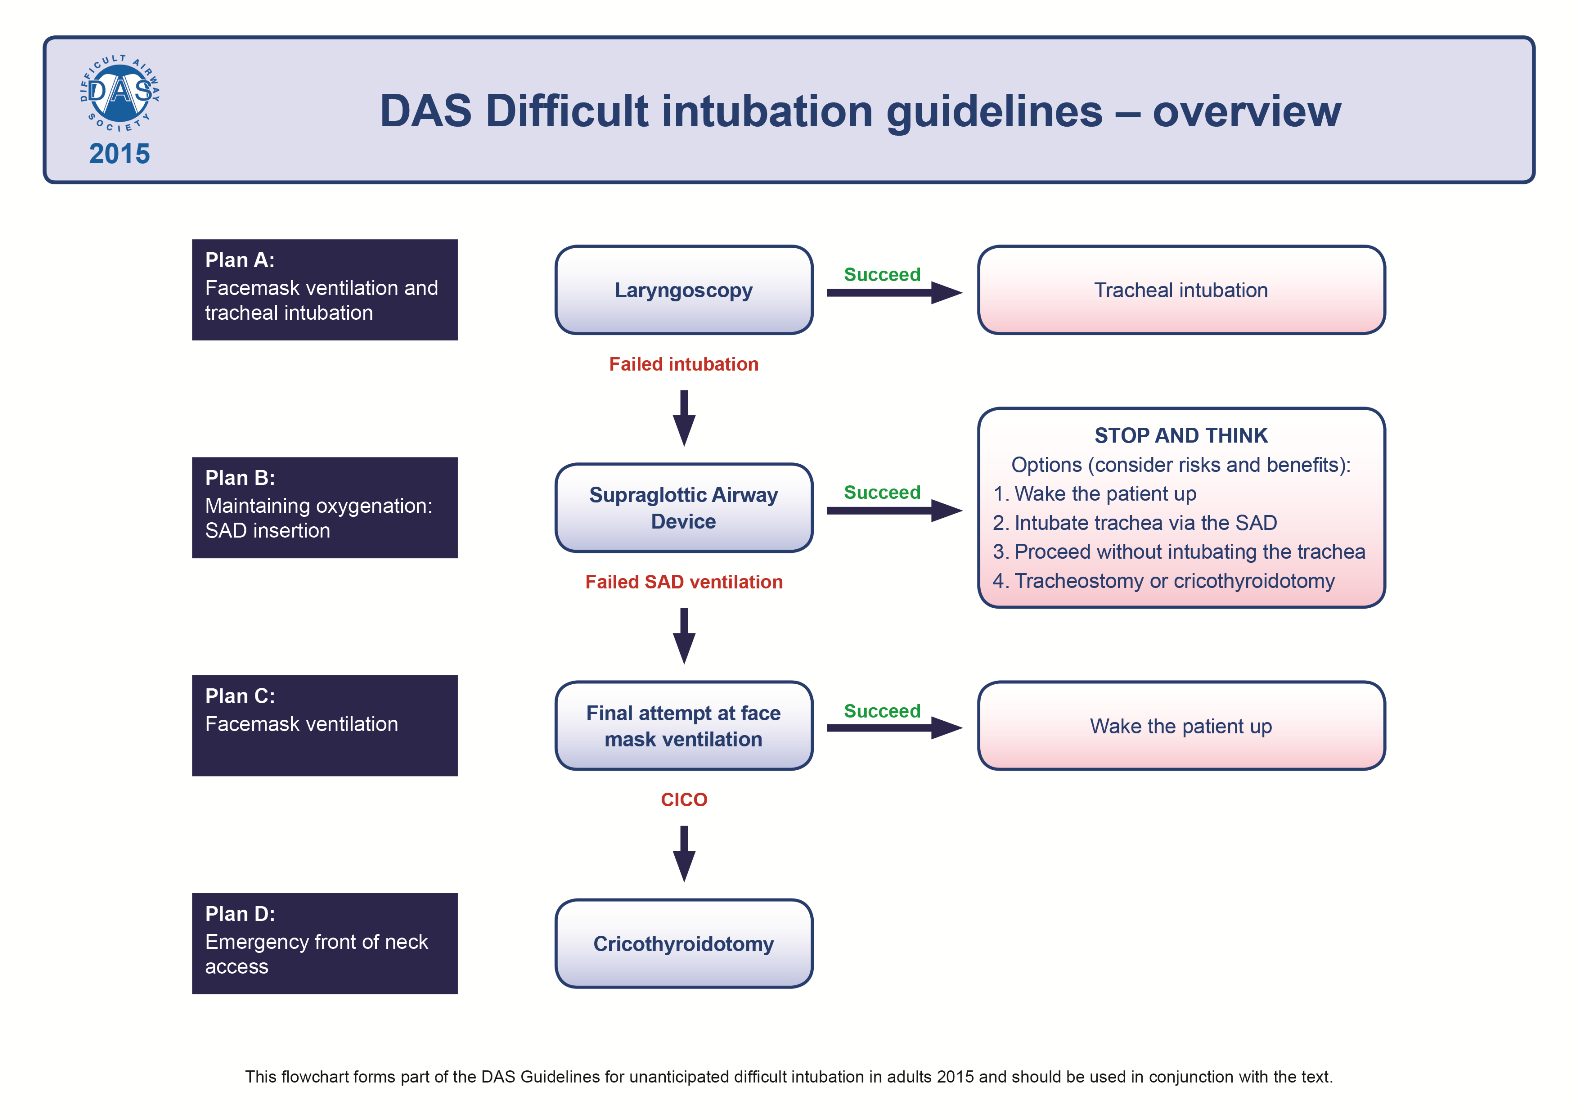 DAS guidelines for management of difficult intubation in adults - Overview